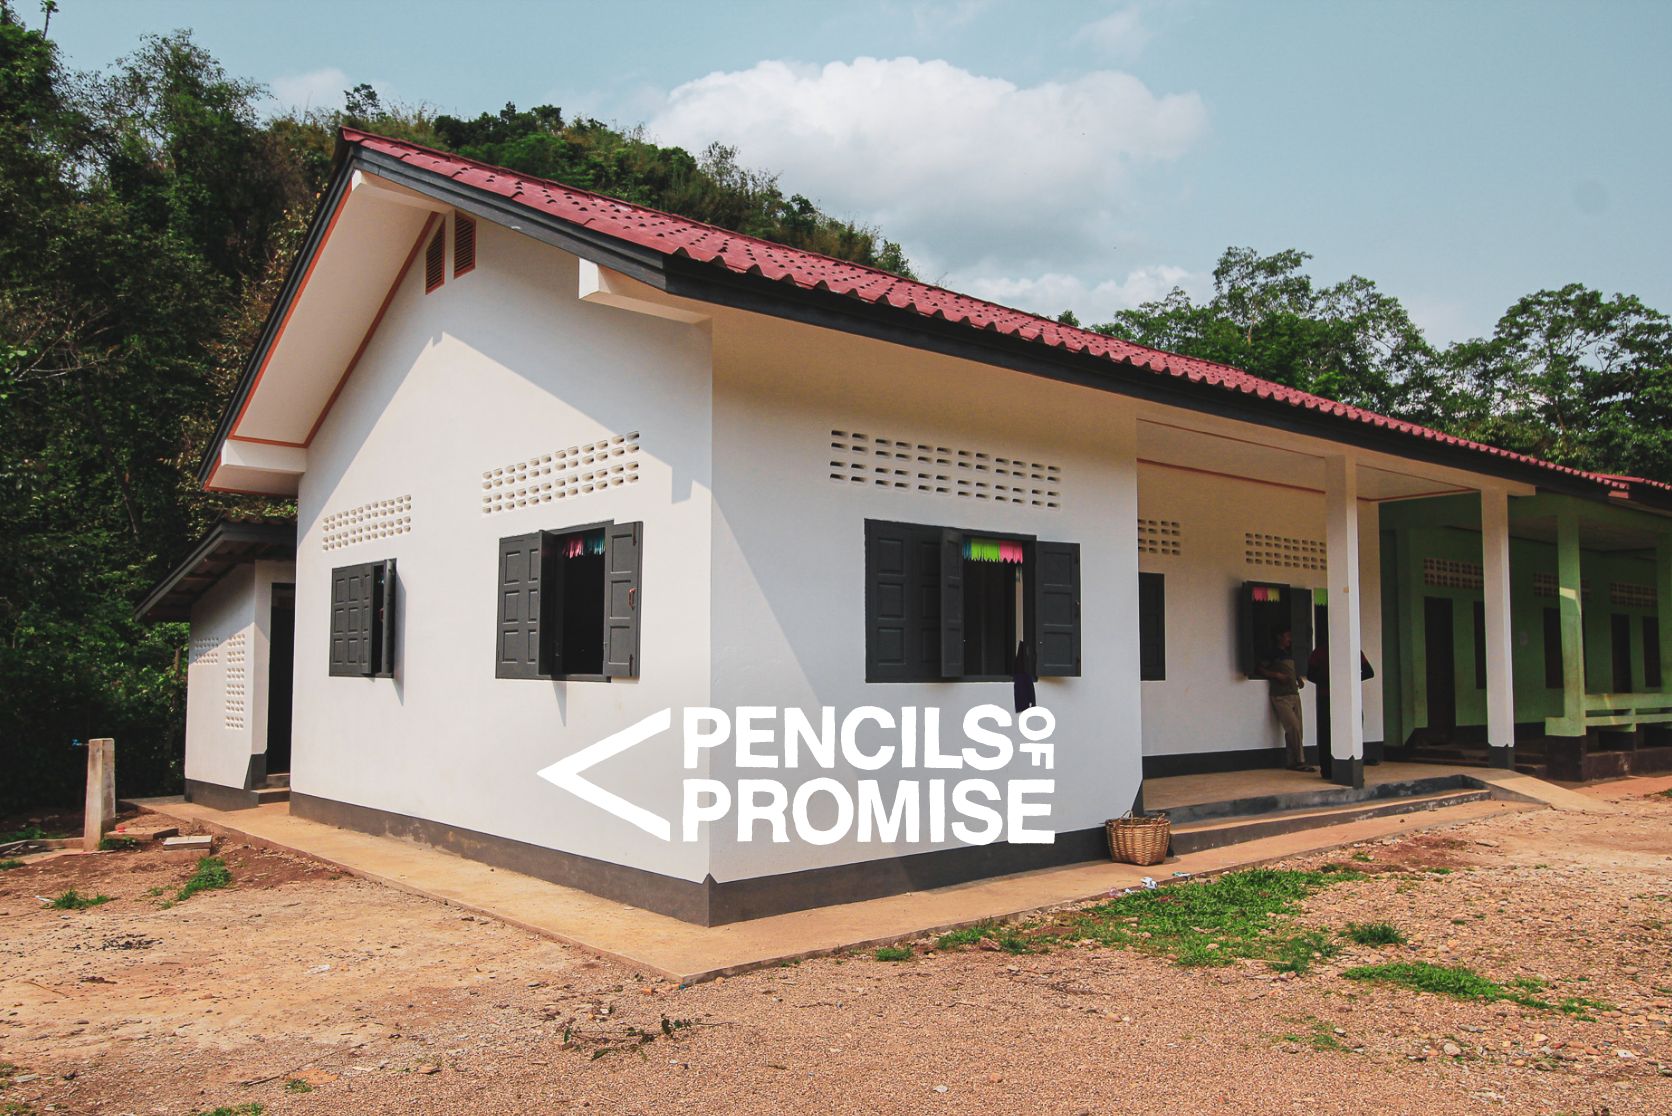 Pencils of Promise 1